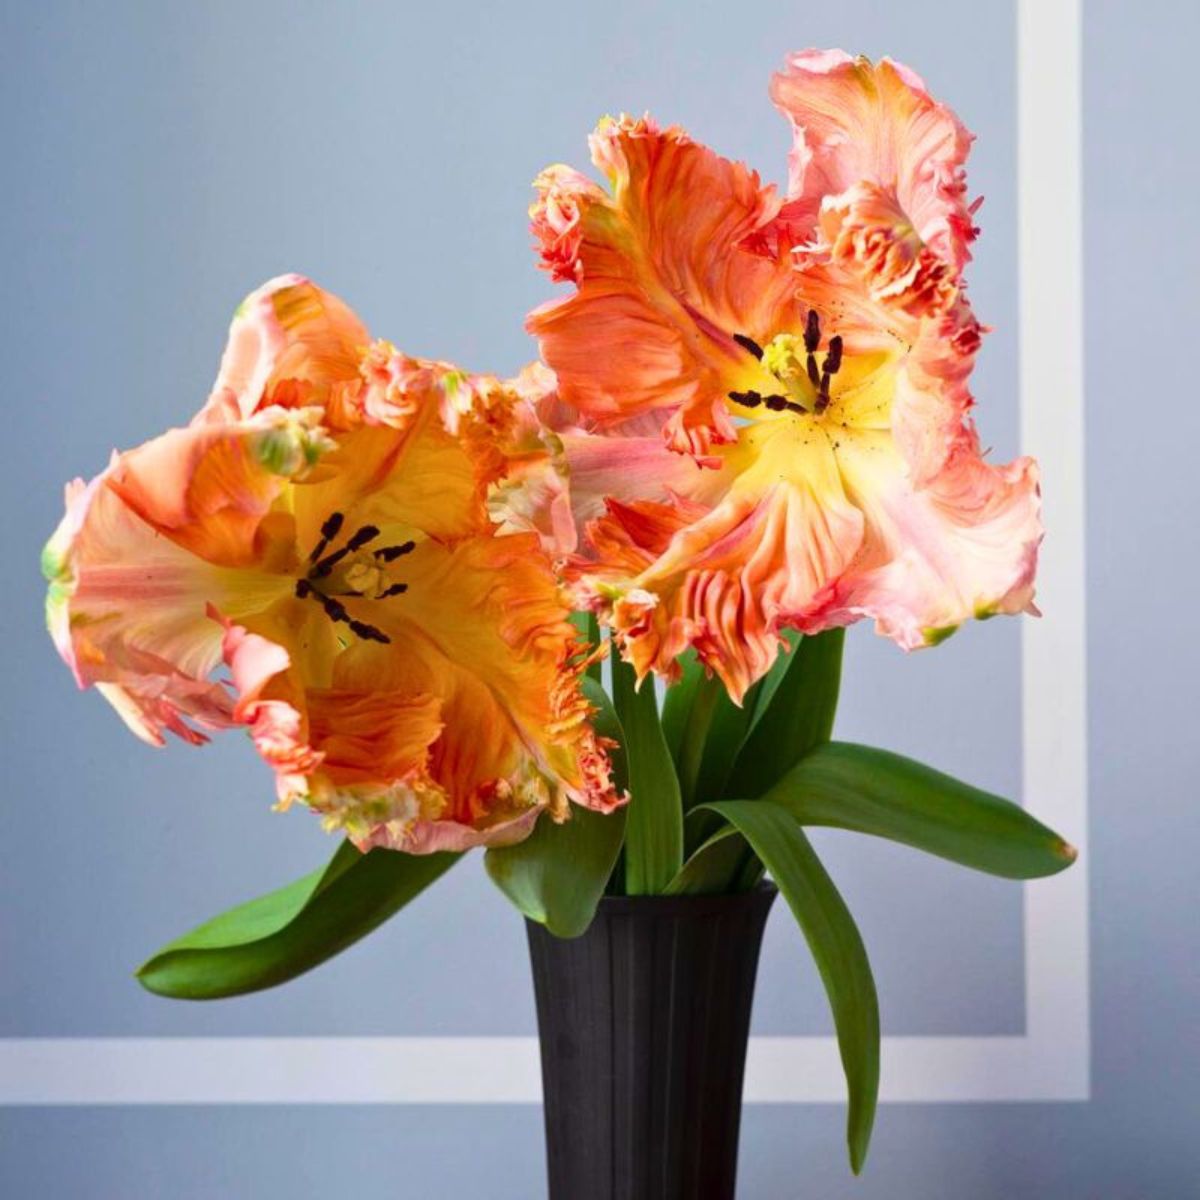 Blooming parrot tulips in a vase